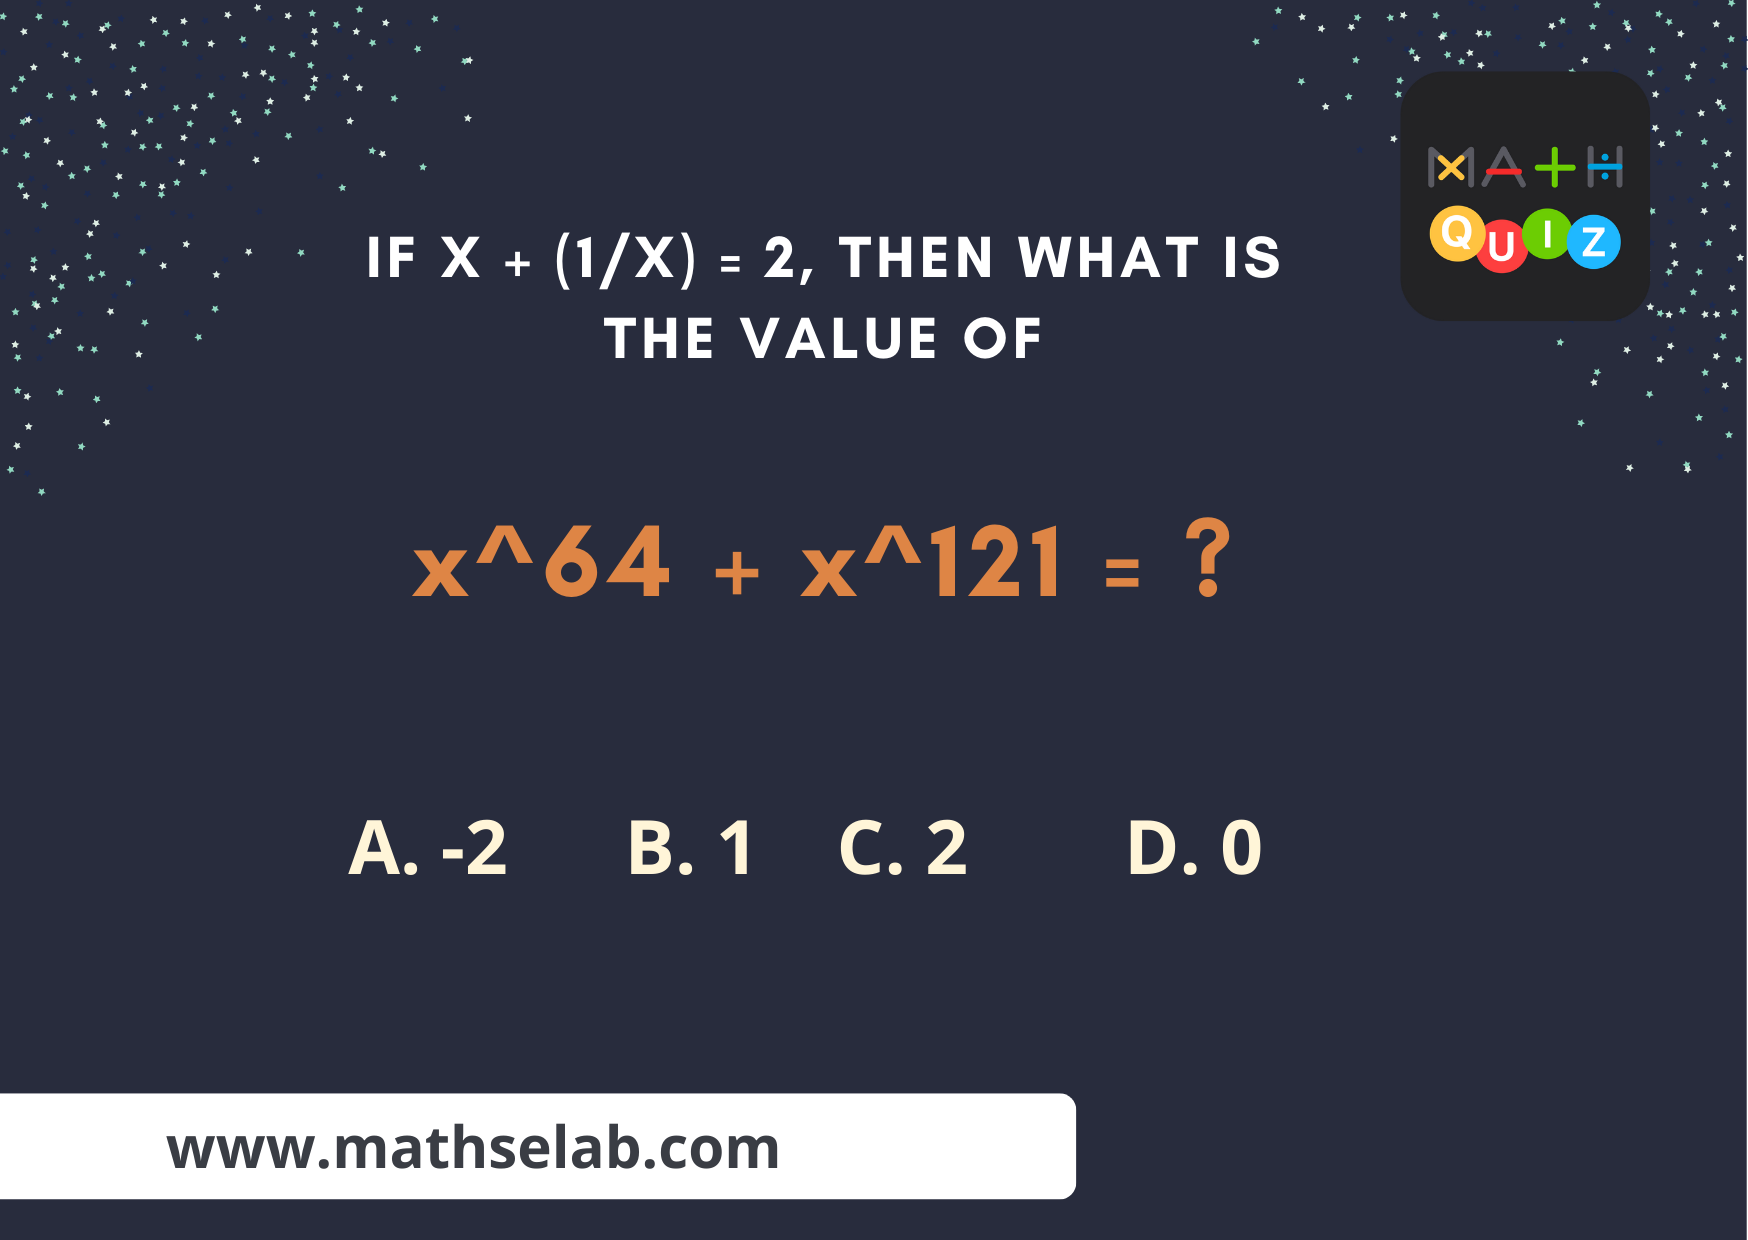 If x + (1/x) = 2, then what is the value of x^64 + x^121 = ?